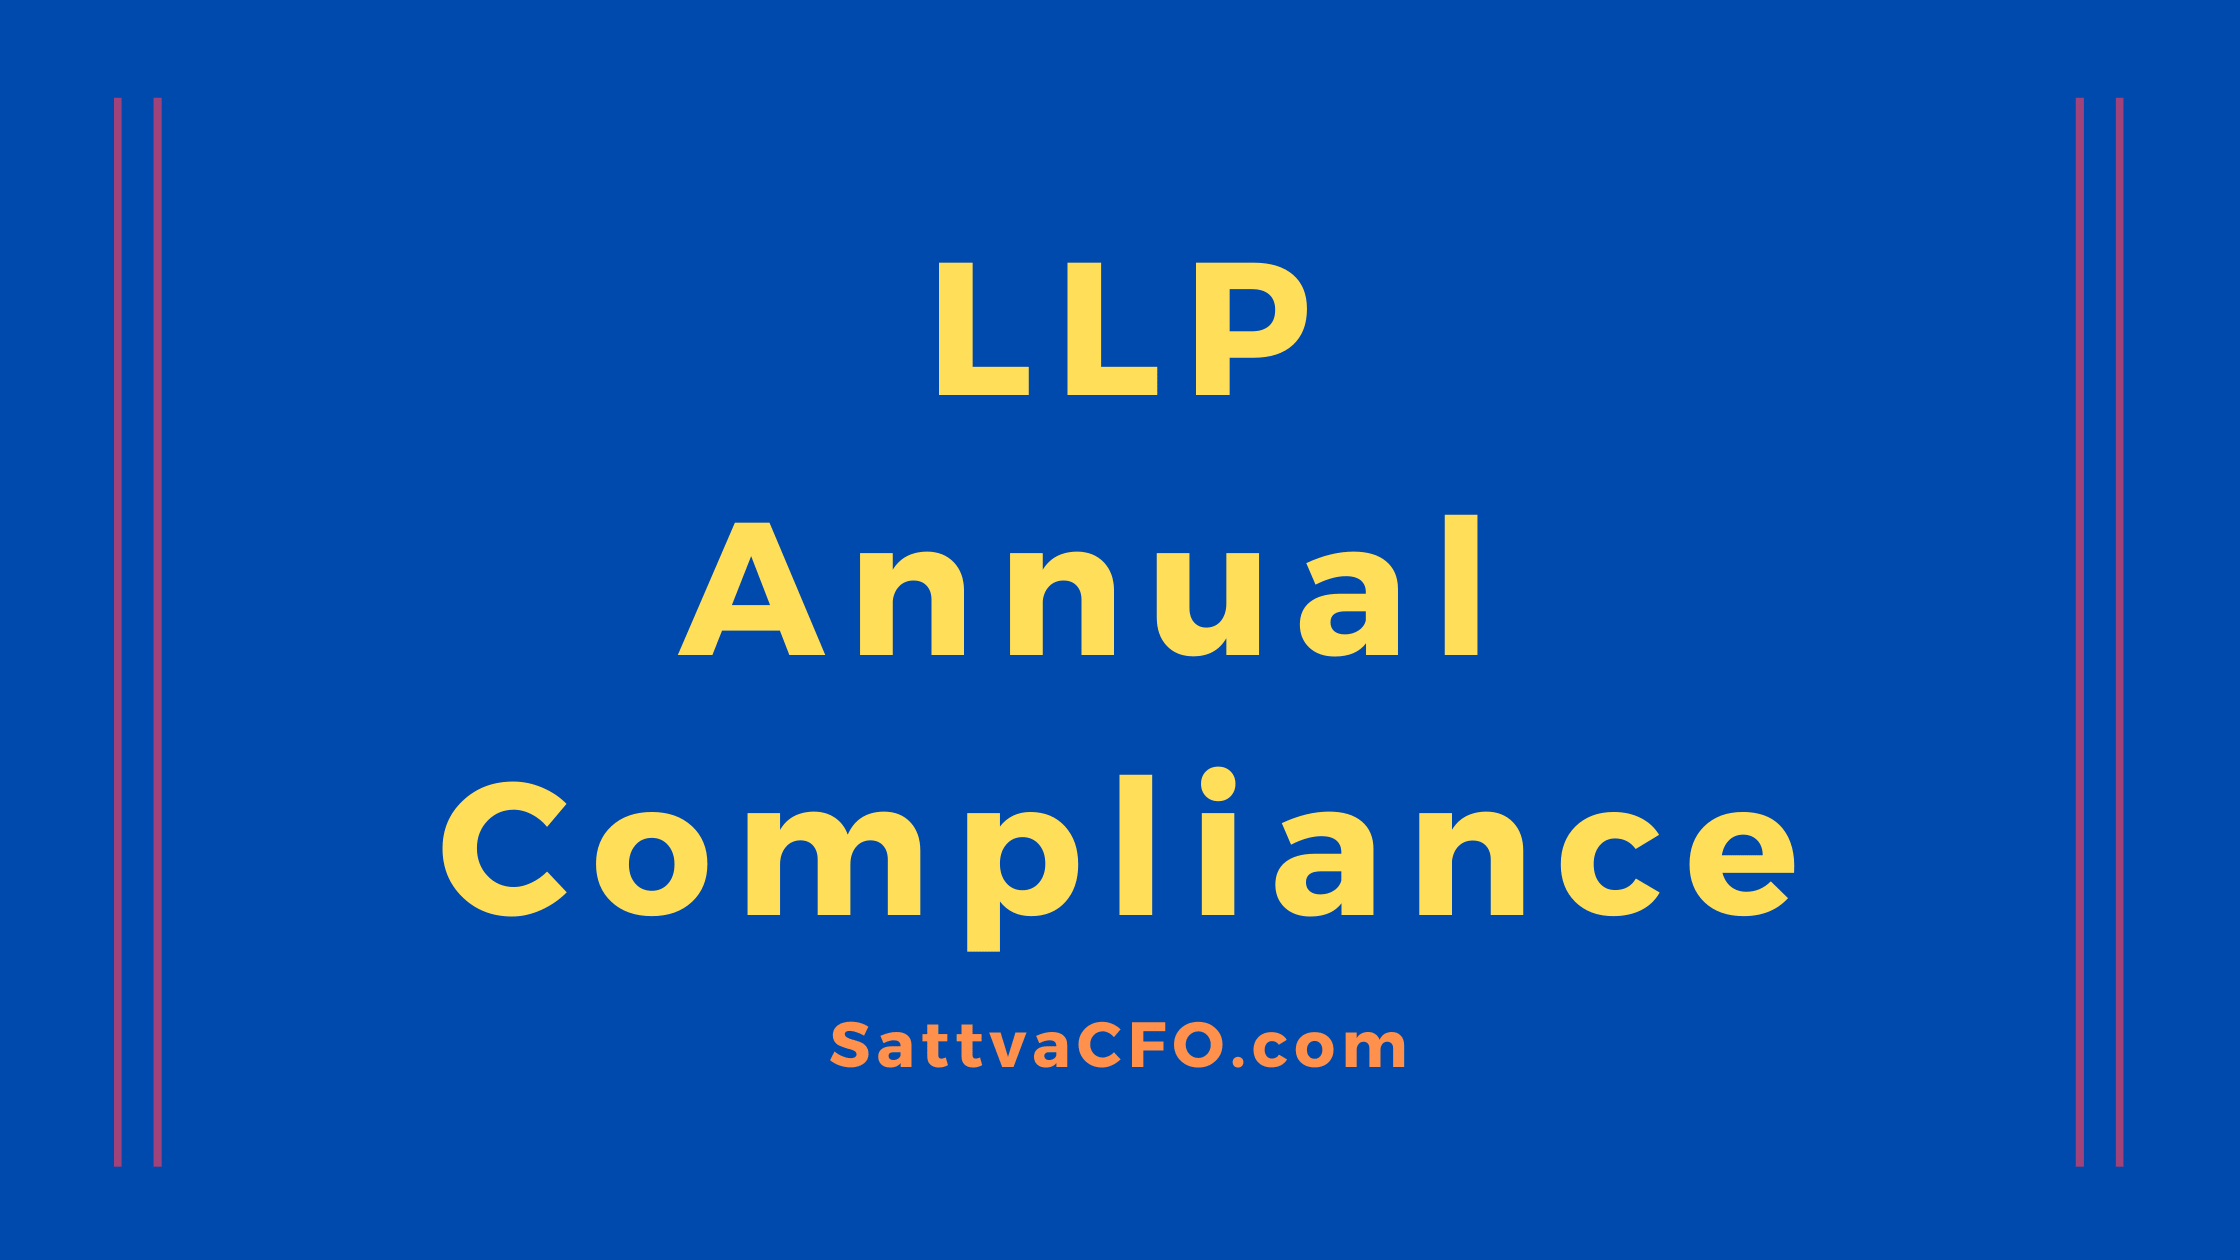 LLP Annual Compliance | SattvaCFO